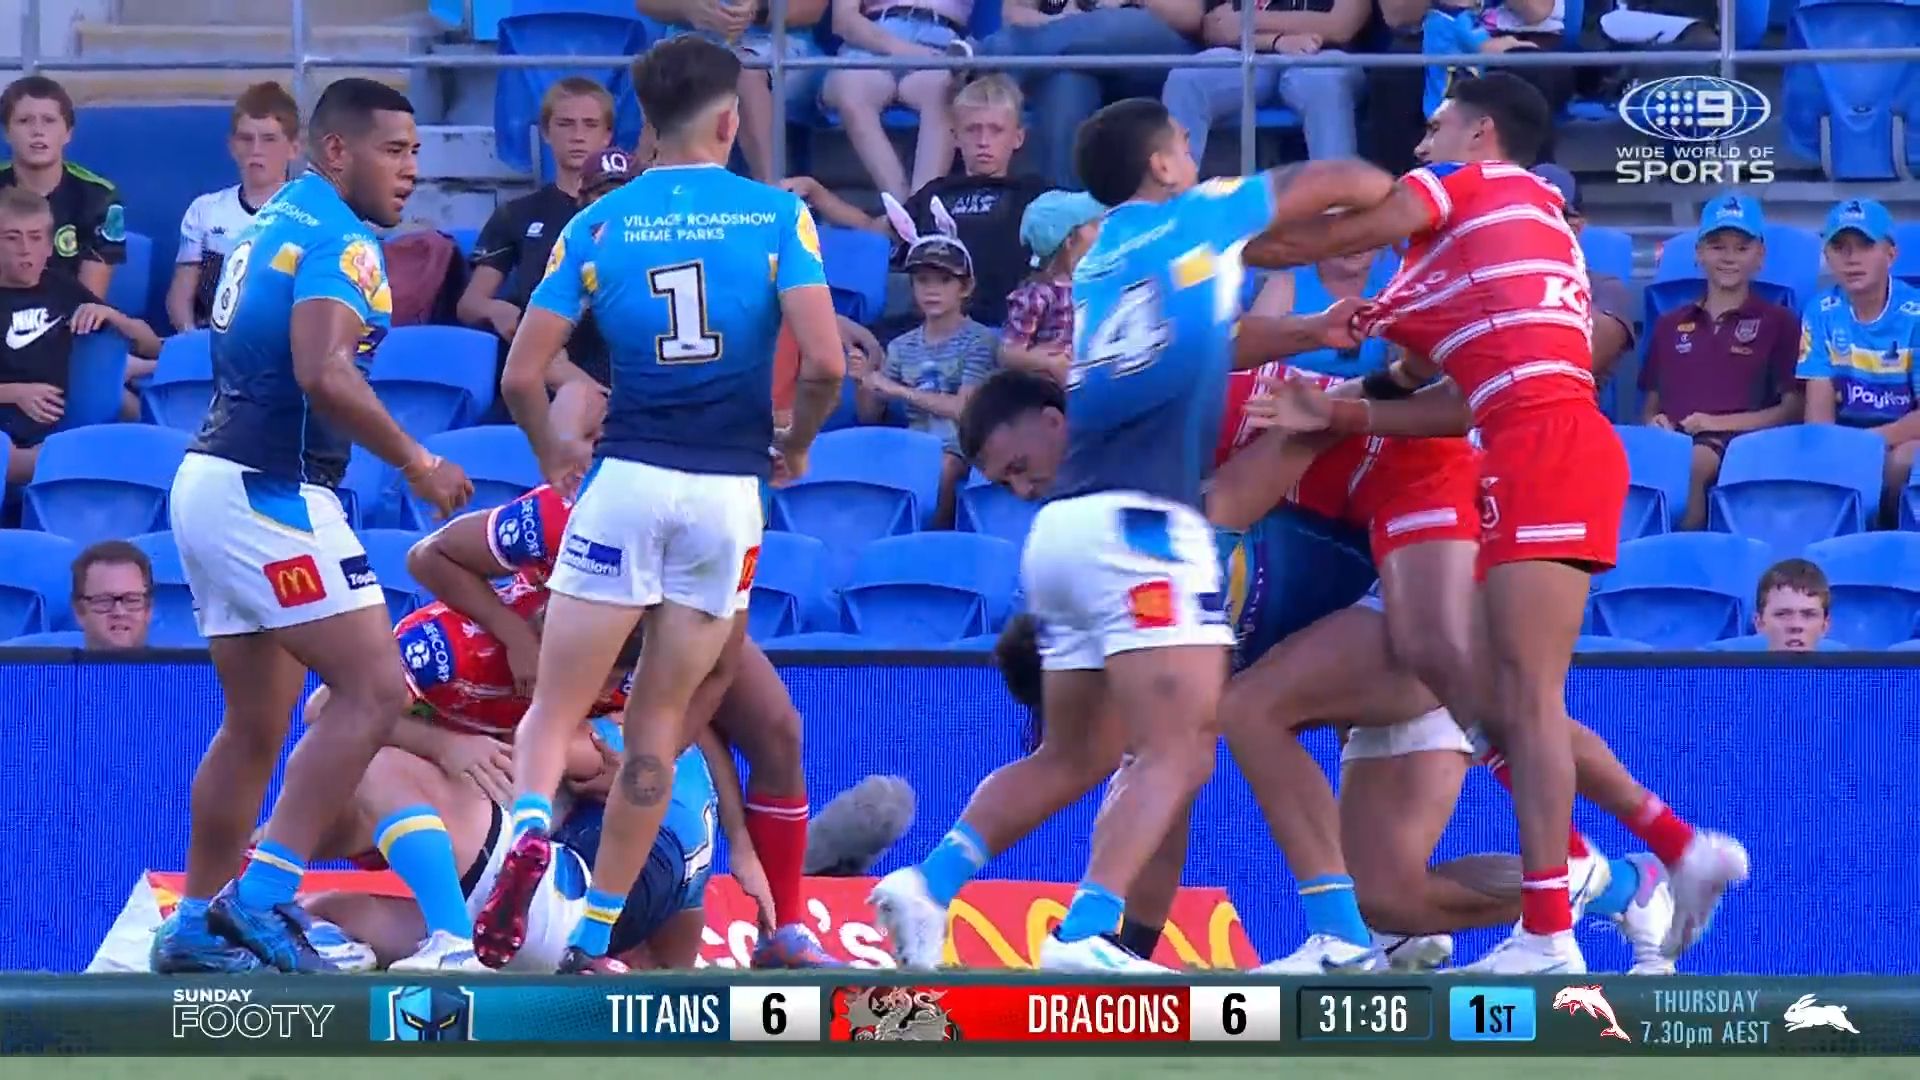 Punch missed as Titans, Dragons players brawl in fiery Gold Coast victory